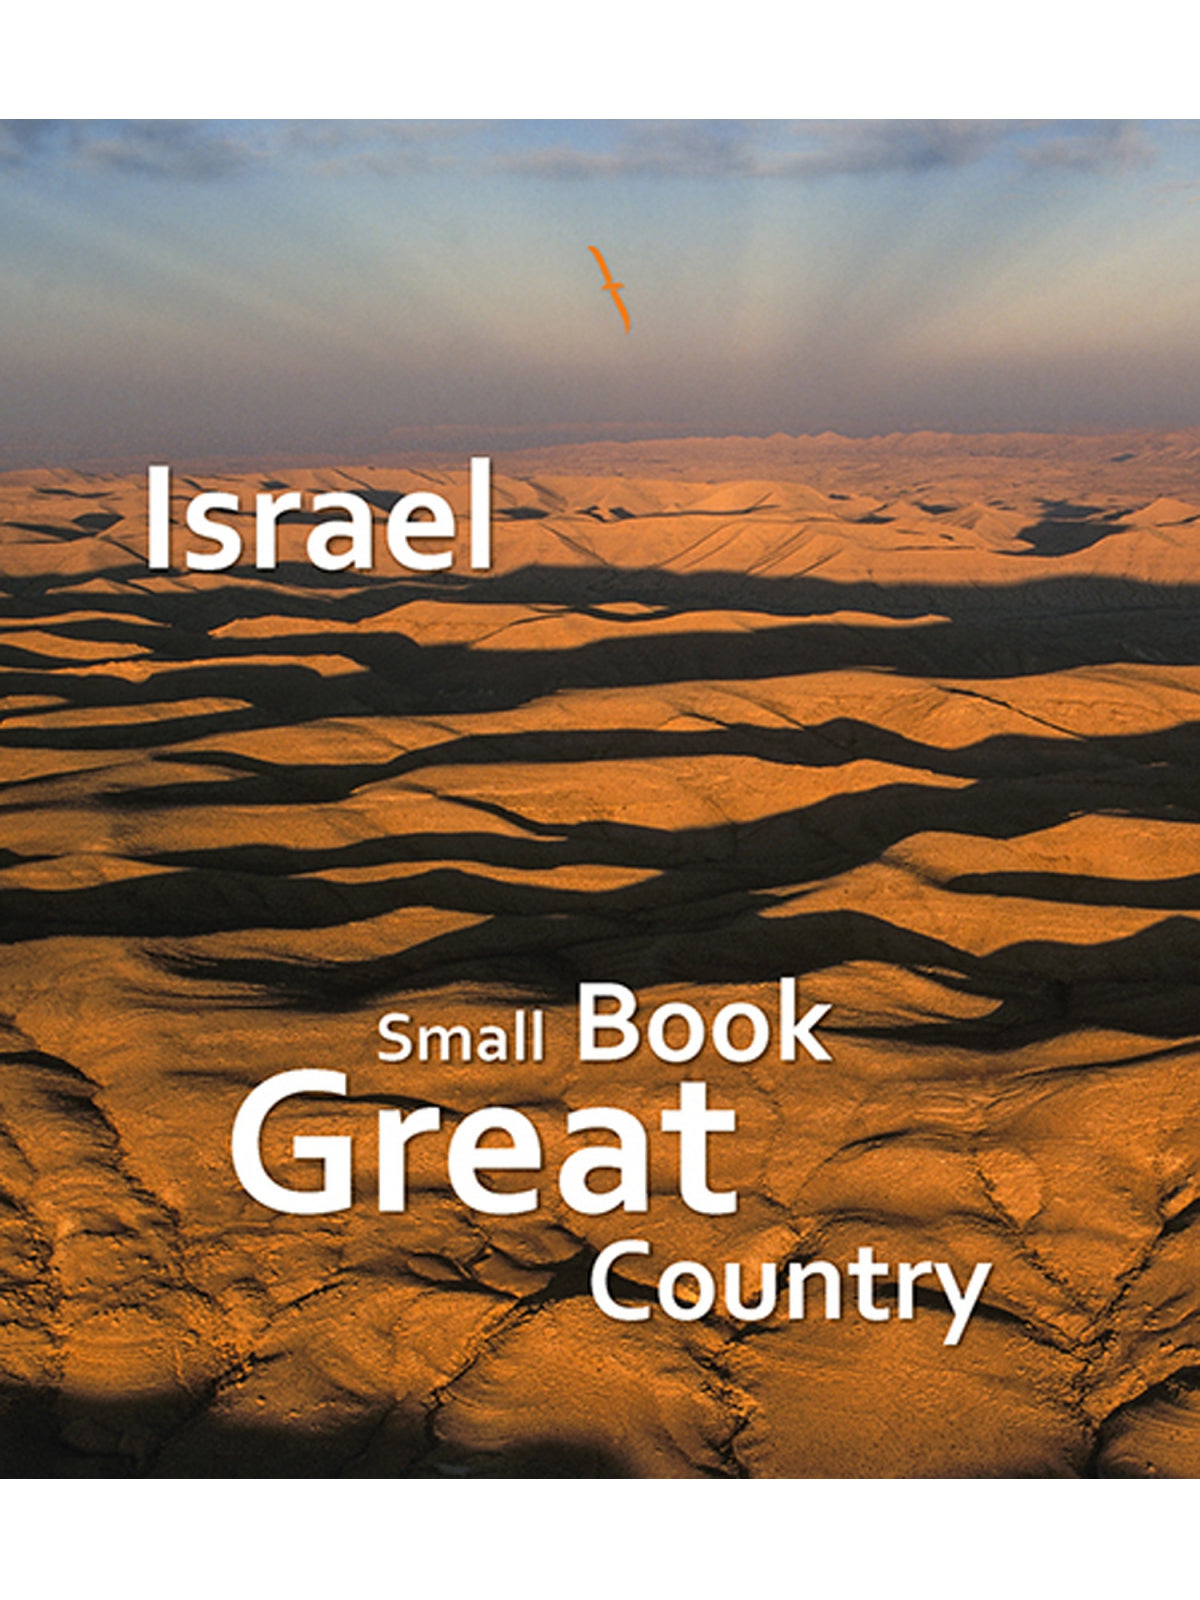 ISRAEL SMALL BOOK GREAT COUNTRY